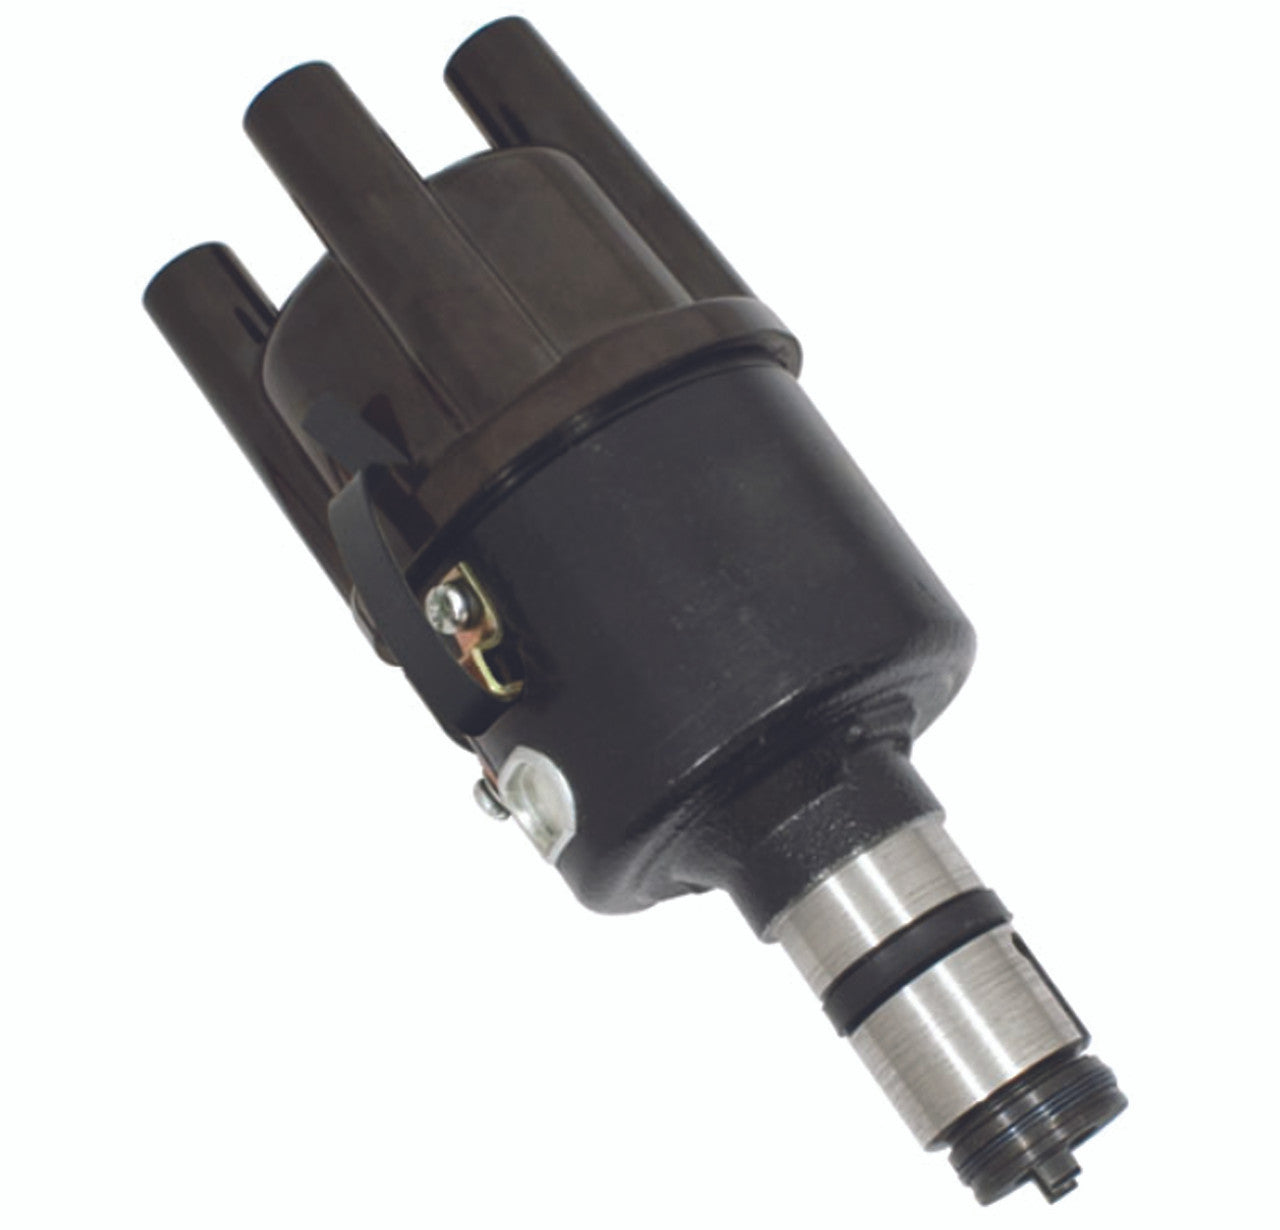 Empi 9472-B Cast Steel Centrifugal Advance Electronic Ignition Distributor For Early Vw Air-cooled Engines